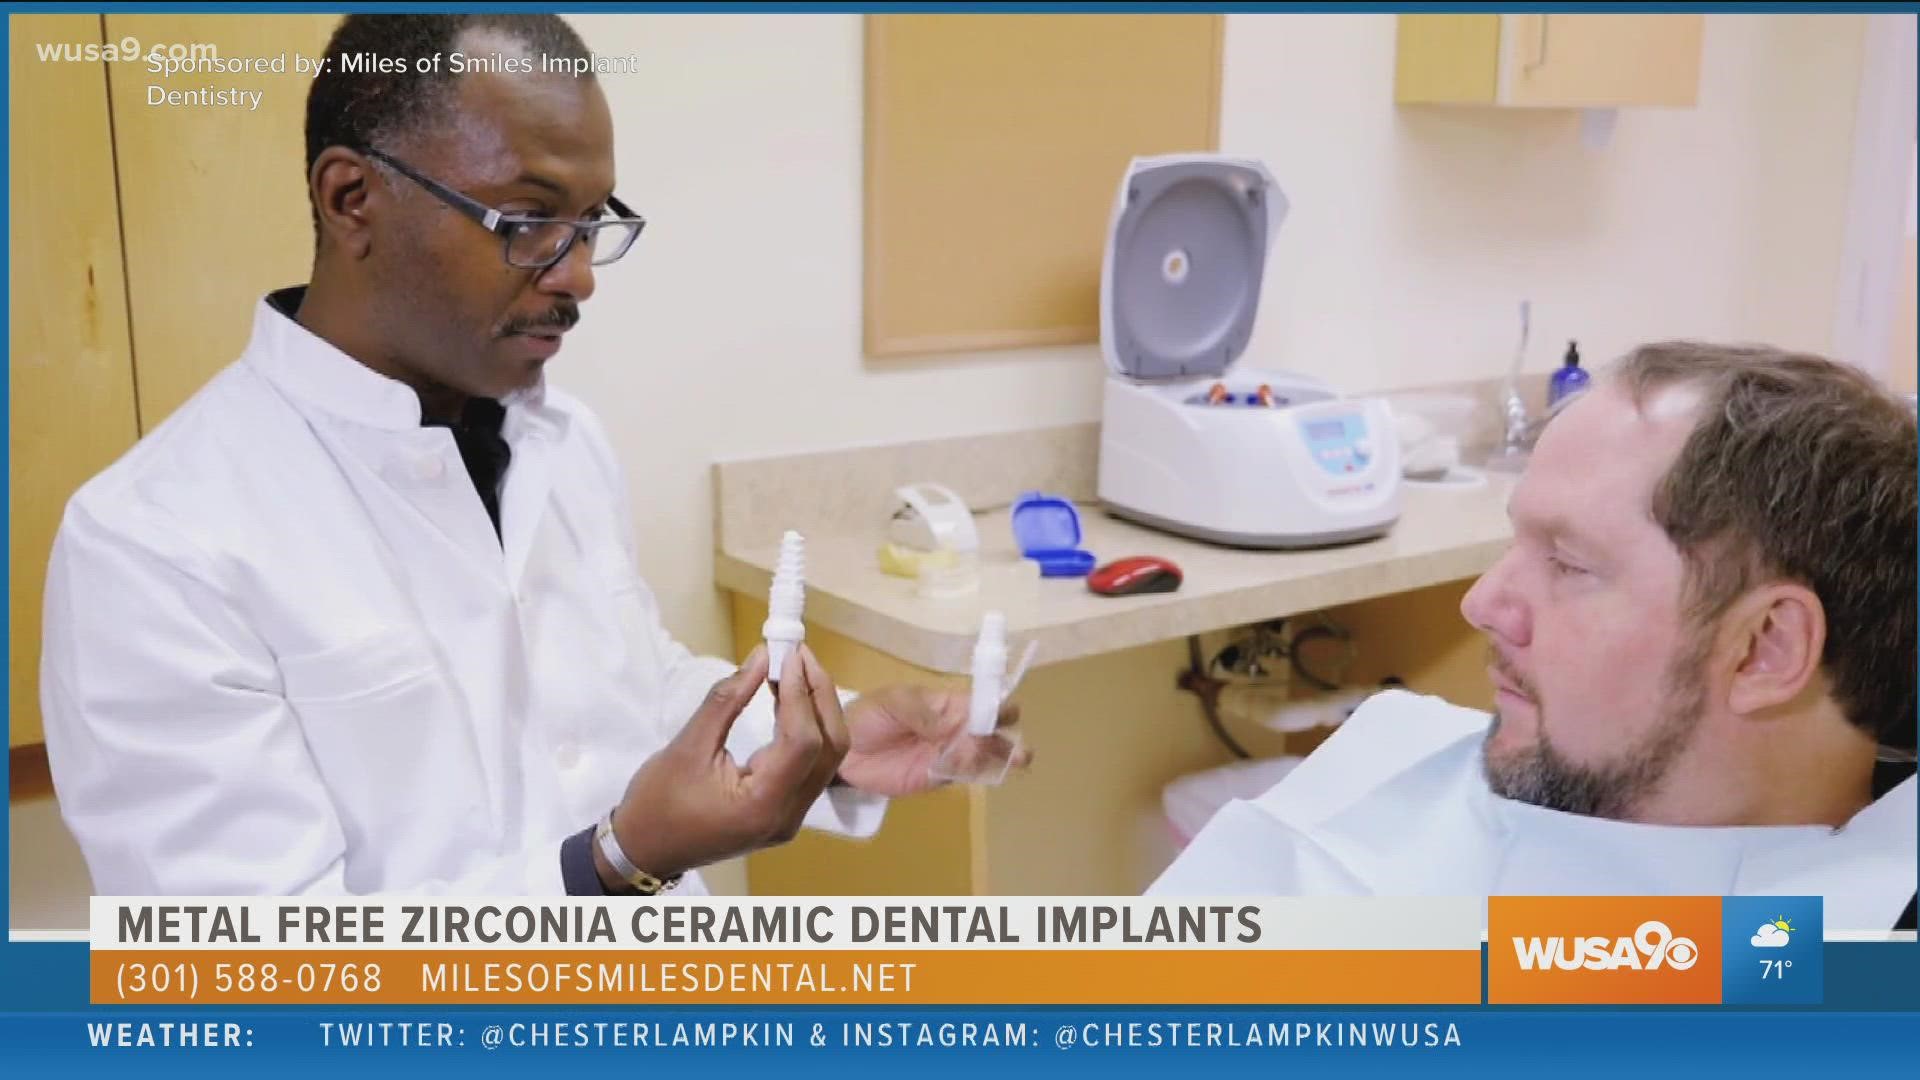 Dr. Sammy Noumbissi explains why metal-free ceramic dental implants can be a better alternative to titanium implants. Sponsored by Miles of Smiles Implant Dentistry.